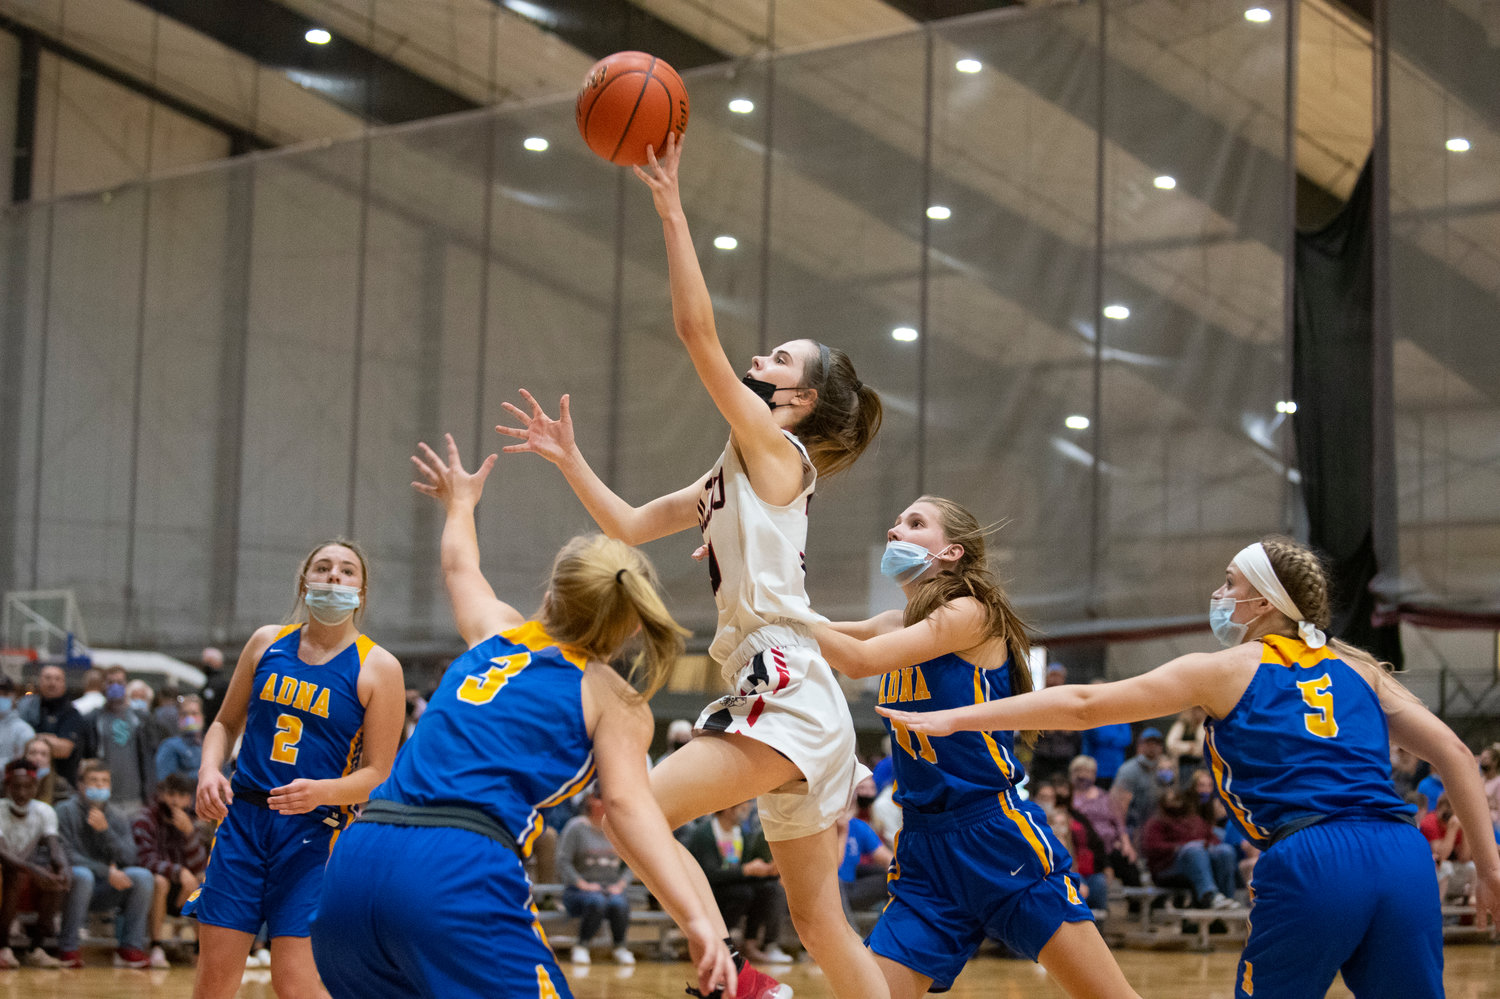 Toledo junior Marina Smith drives to the hoops against Adna in the district semifinals on Wednesday.